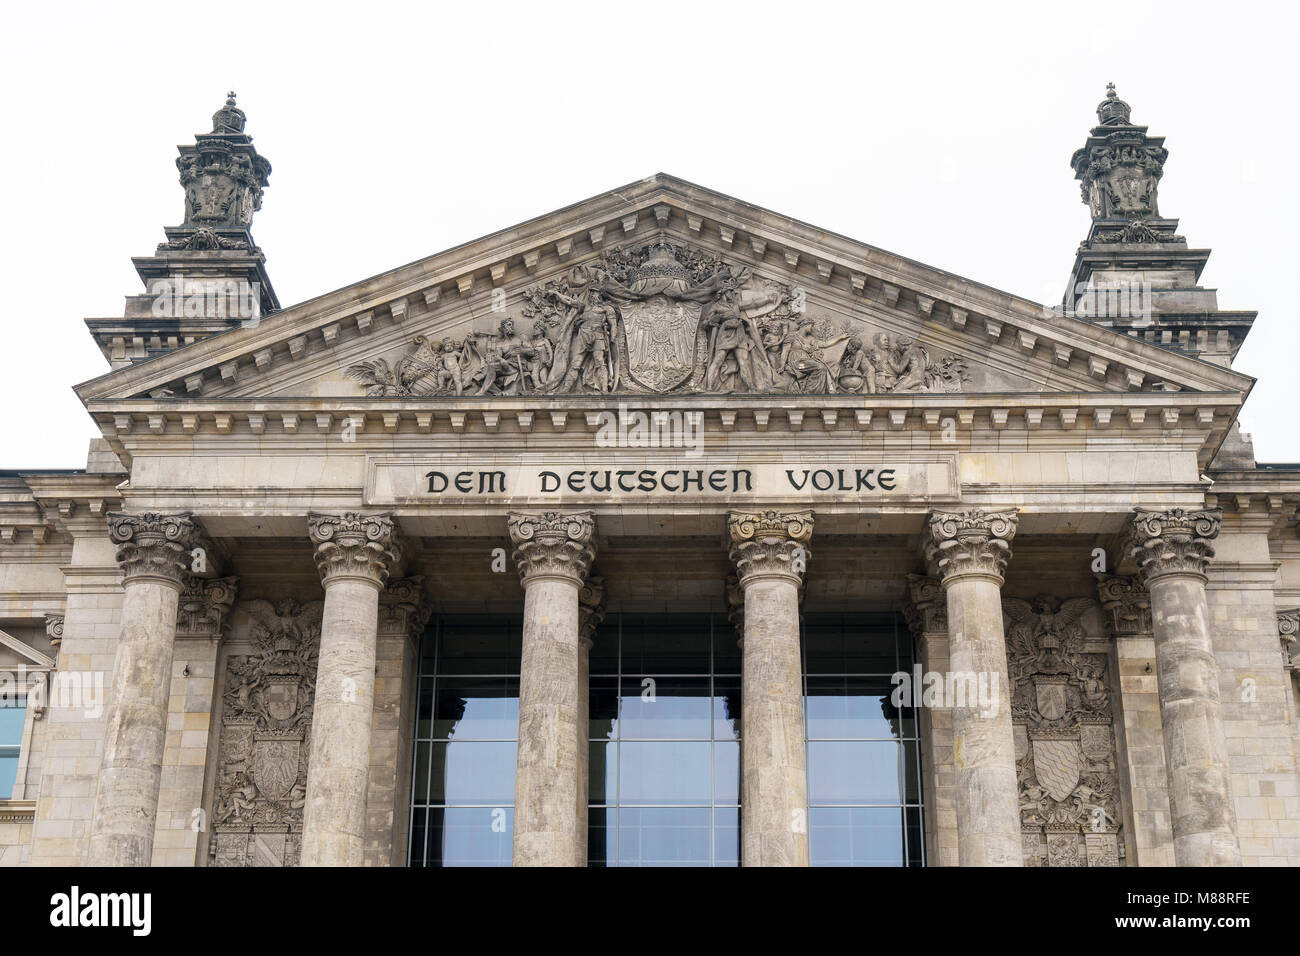 German inscription Dem Deutschen Volke, meaning To The German People, on the portal of Bundestag or Reichstag building in Berlin, Germany Stock Photo